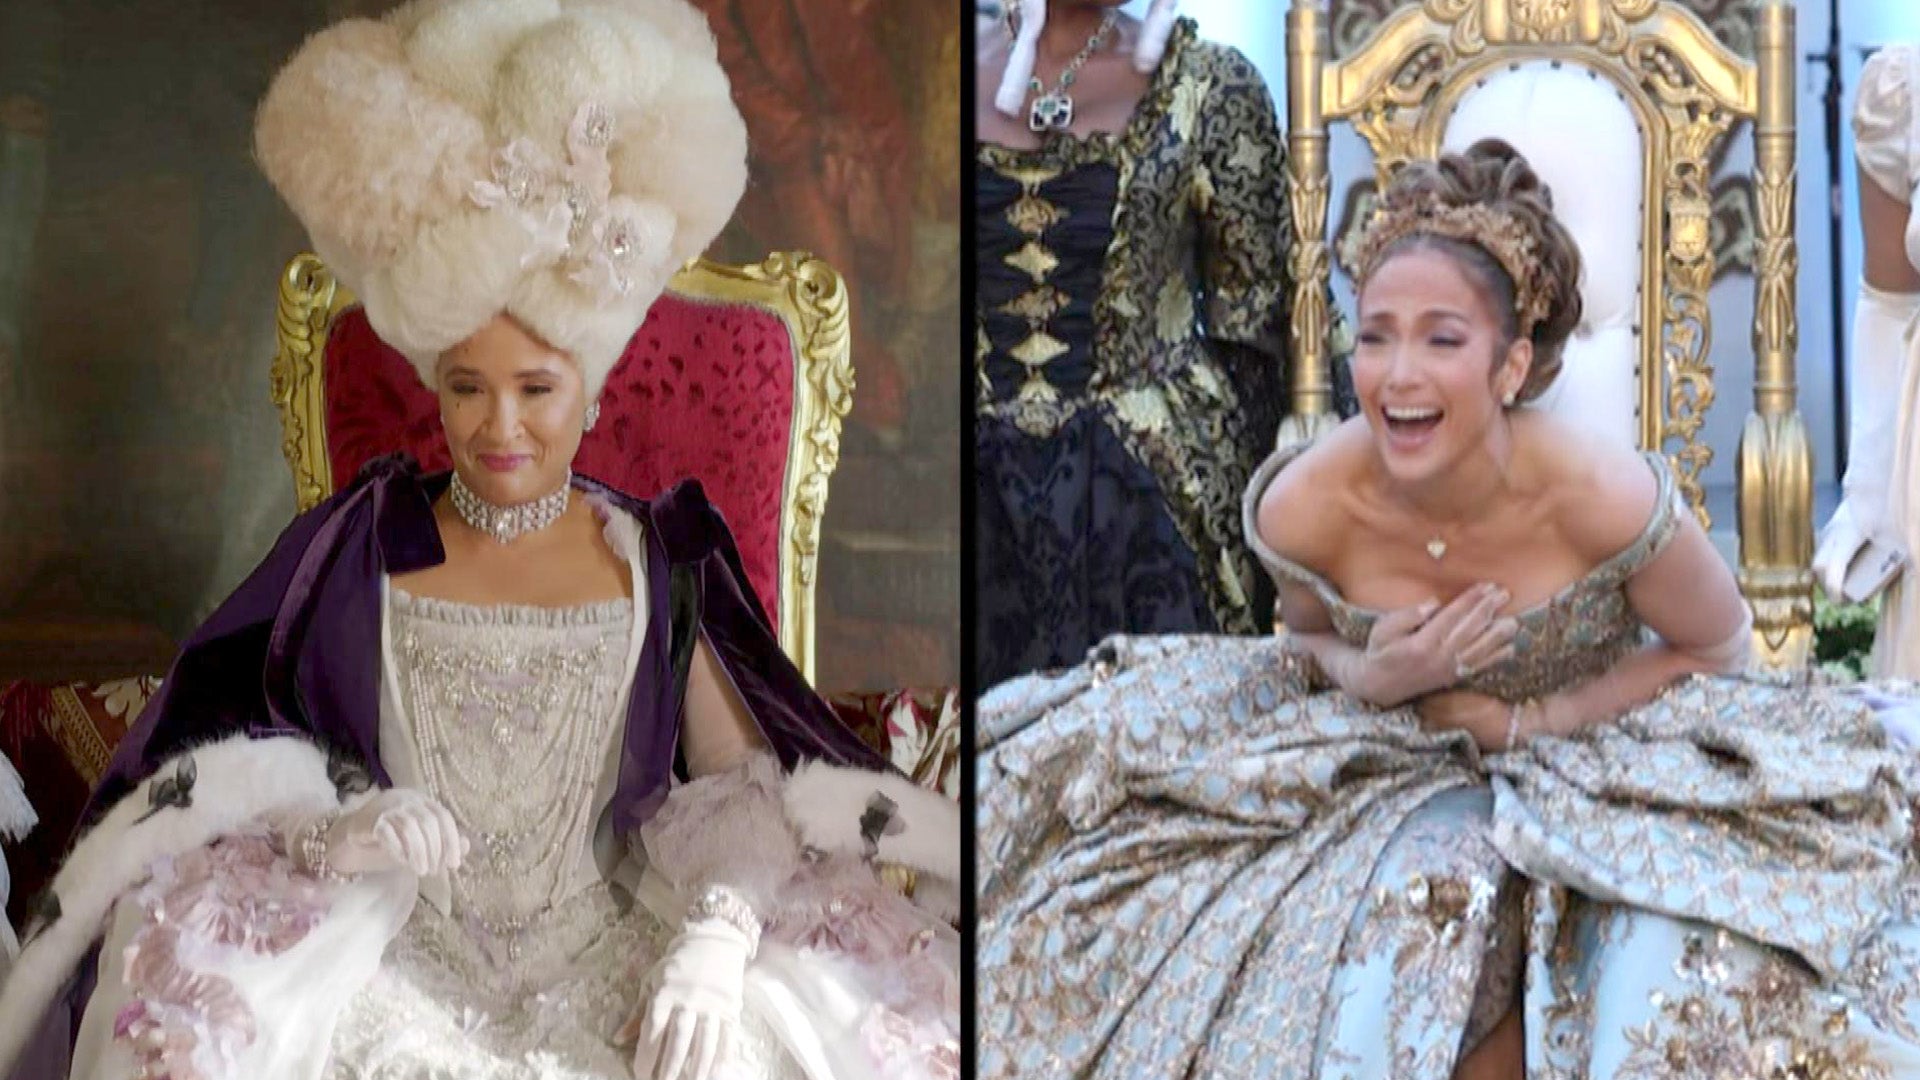 J.Lo Channels Queen Charlotte in Extravagant Gown for ‘Bridgerton’-Themed Birthday Bash